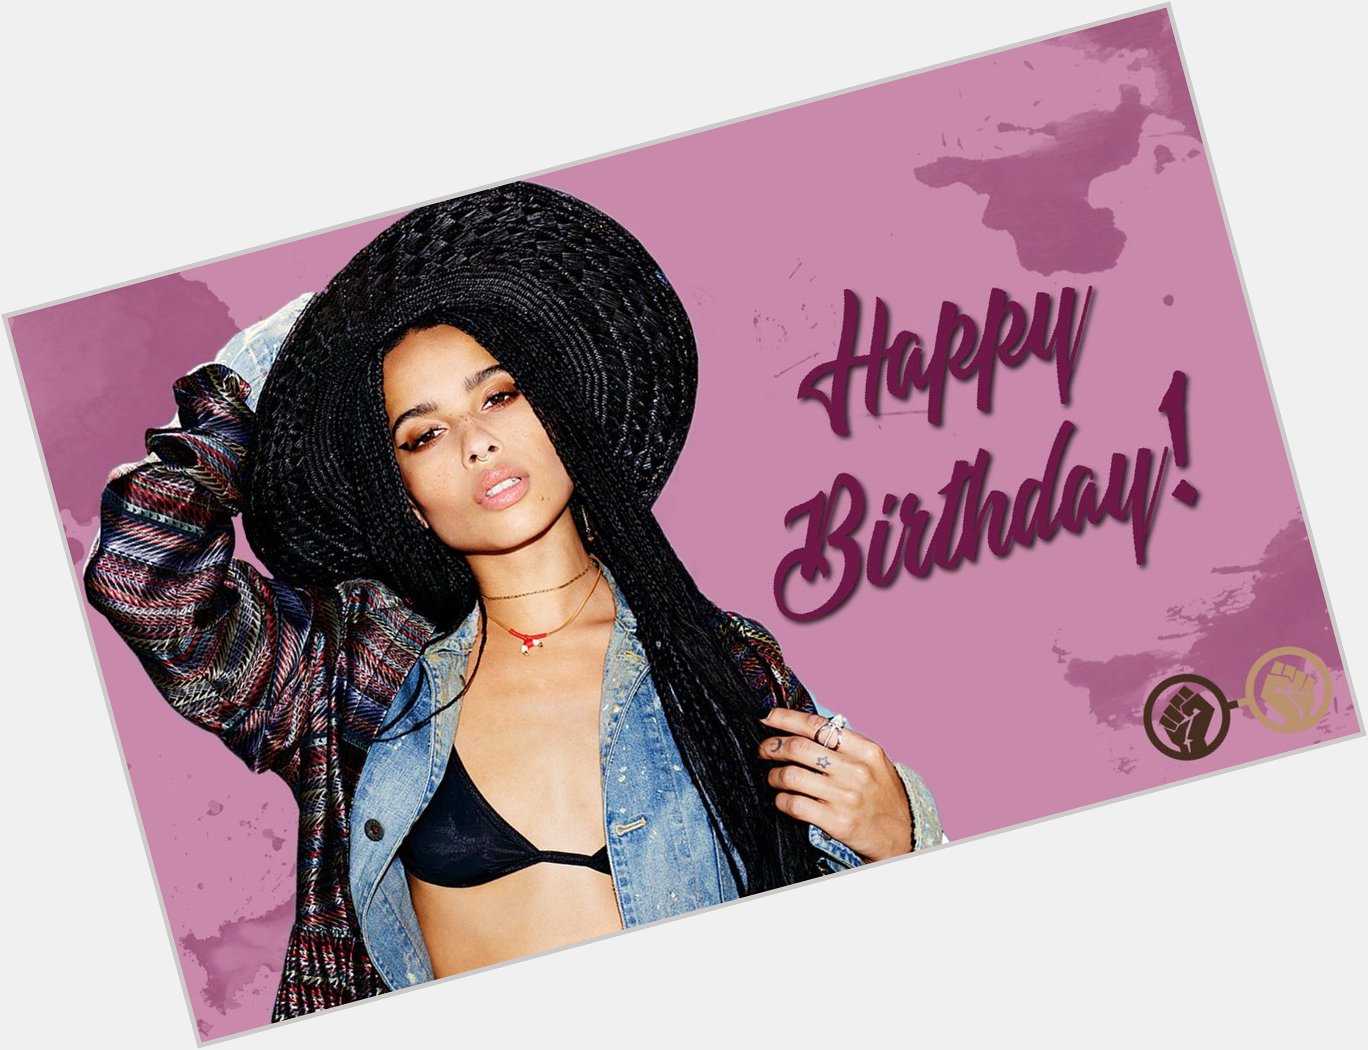 Happy Birthday, Zoë Kravitz! The talented actress, model, and singer turns 29 today! 